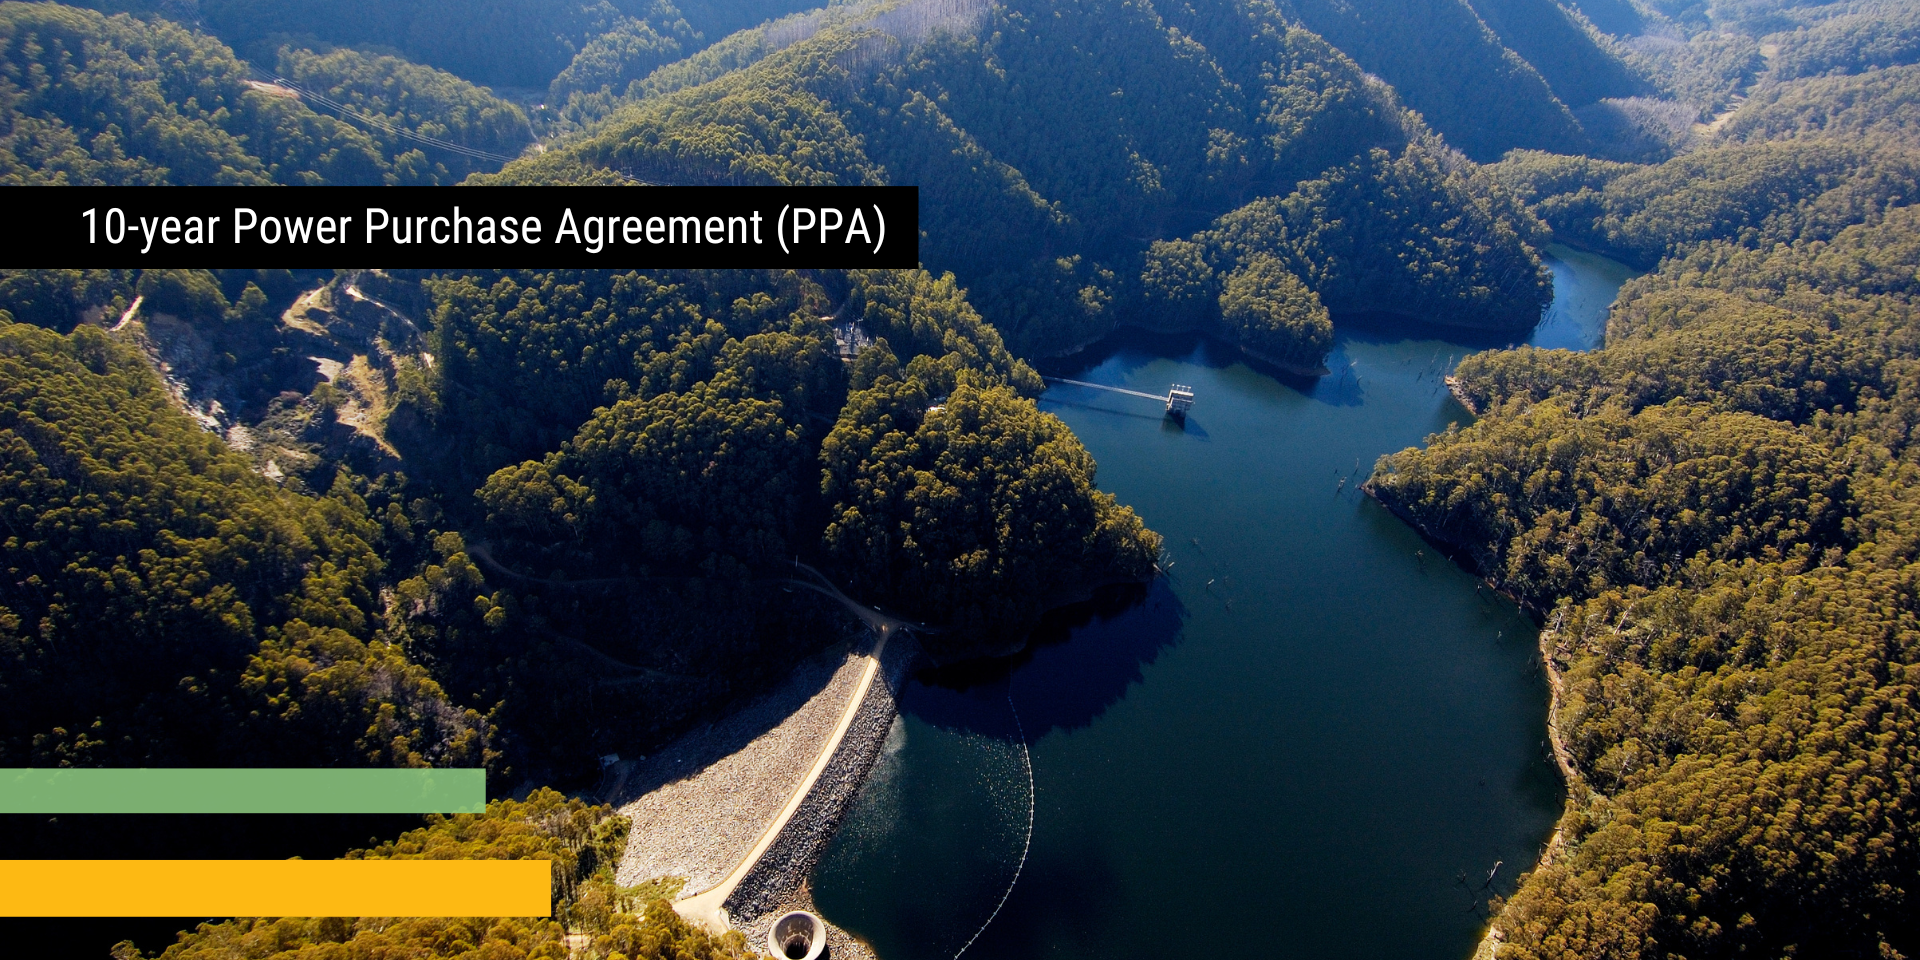 Procurement Australia facilitates a 10-year Power Purchase Agreement (PPA) with Snowy Hydro, through Red Energy in New South Wales